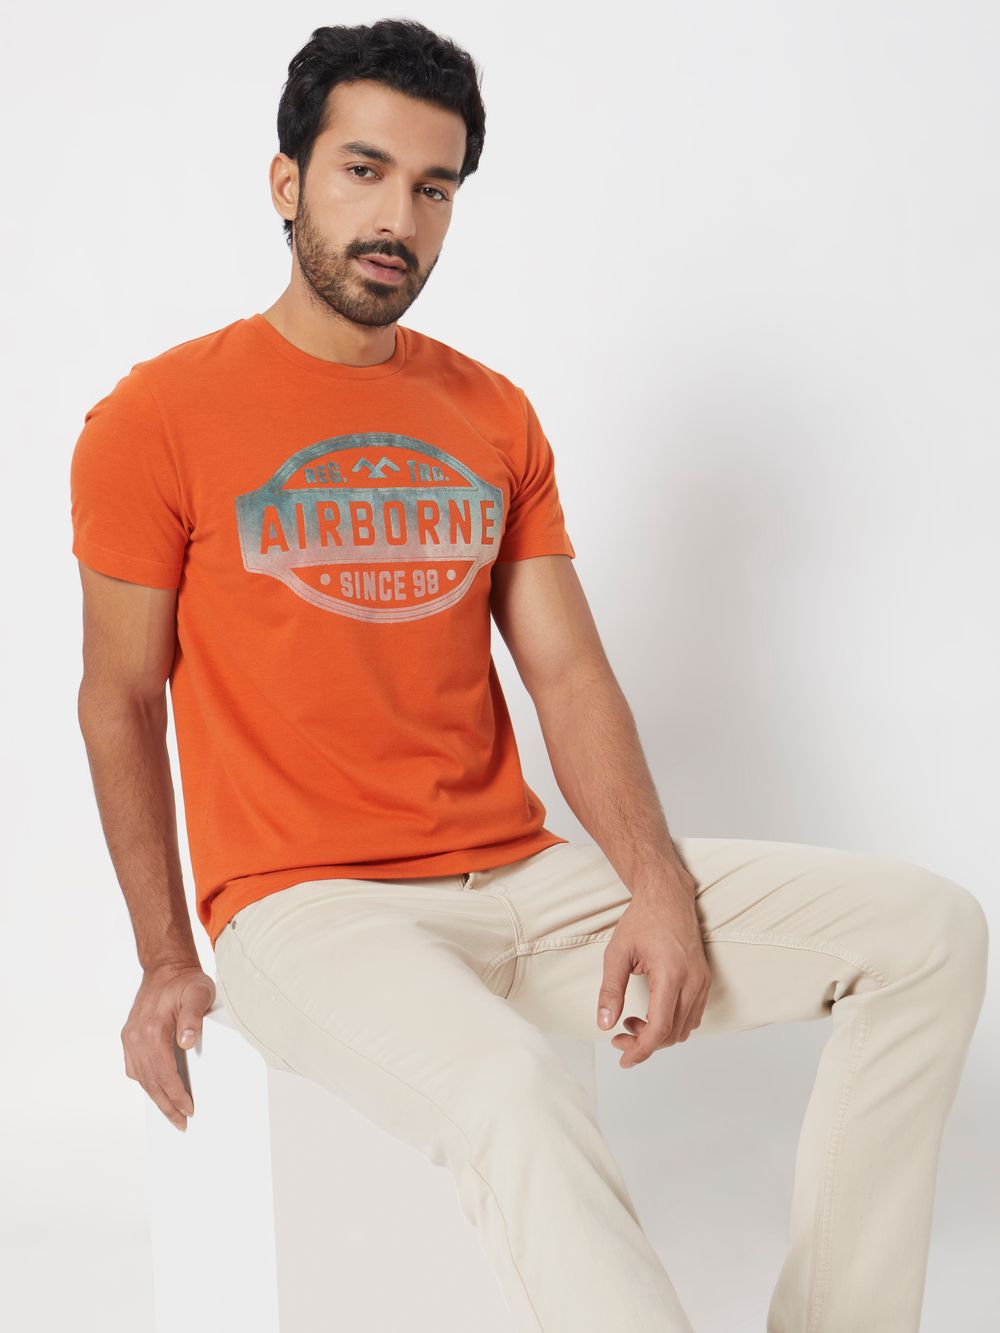 Rust Textured Graphic Slim Fit T-Shirt